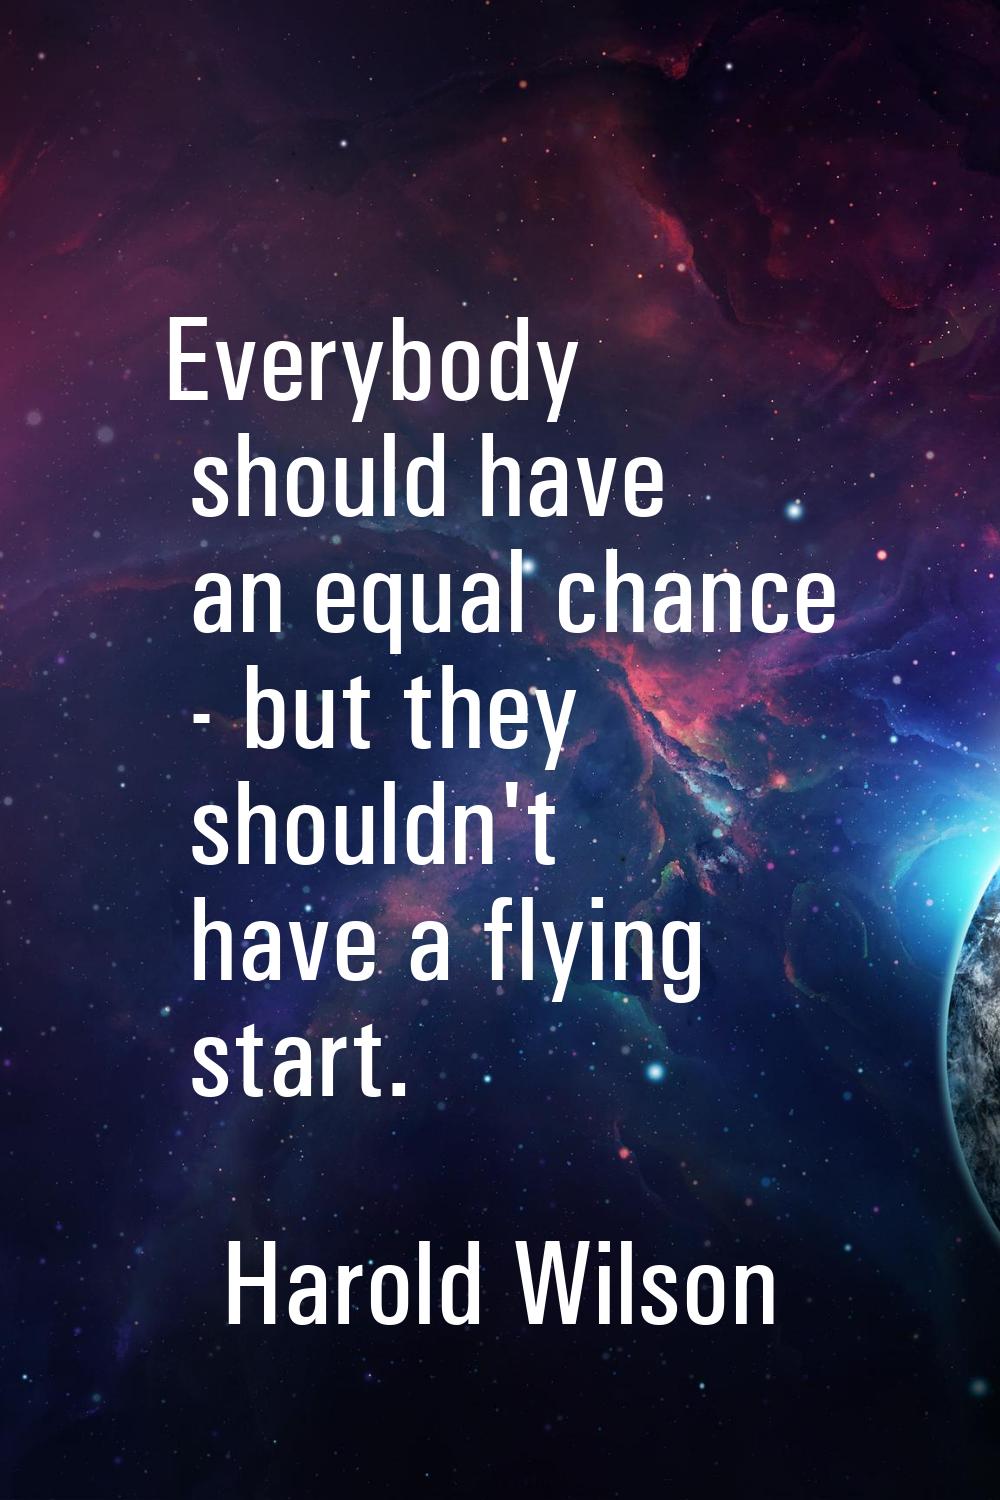 Everybody should have an equal chance - but they shouldn't have a flying start.